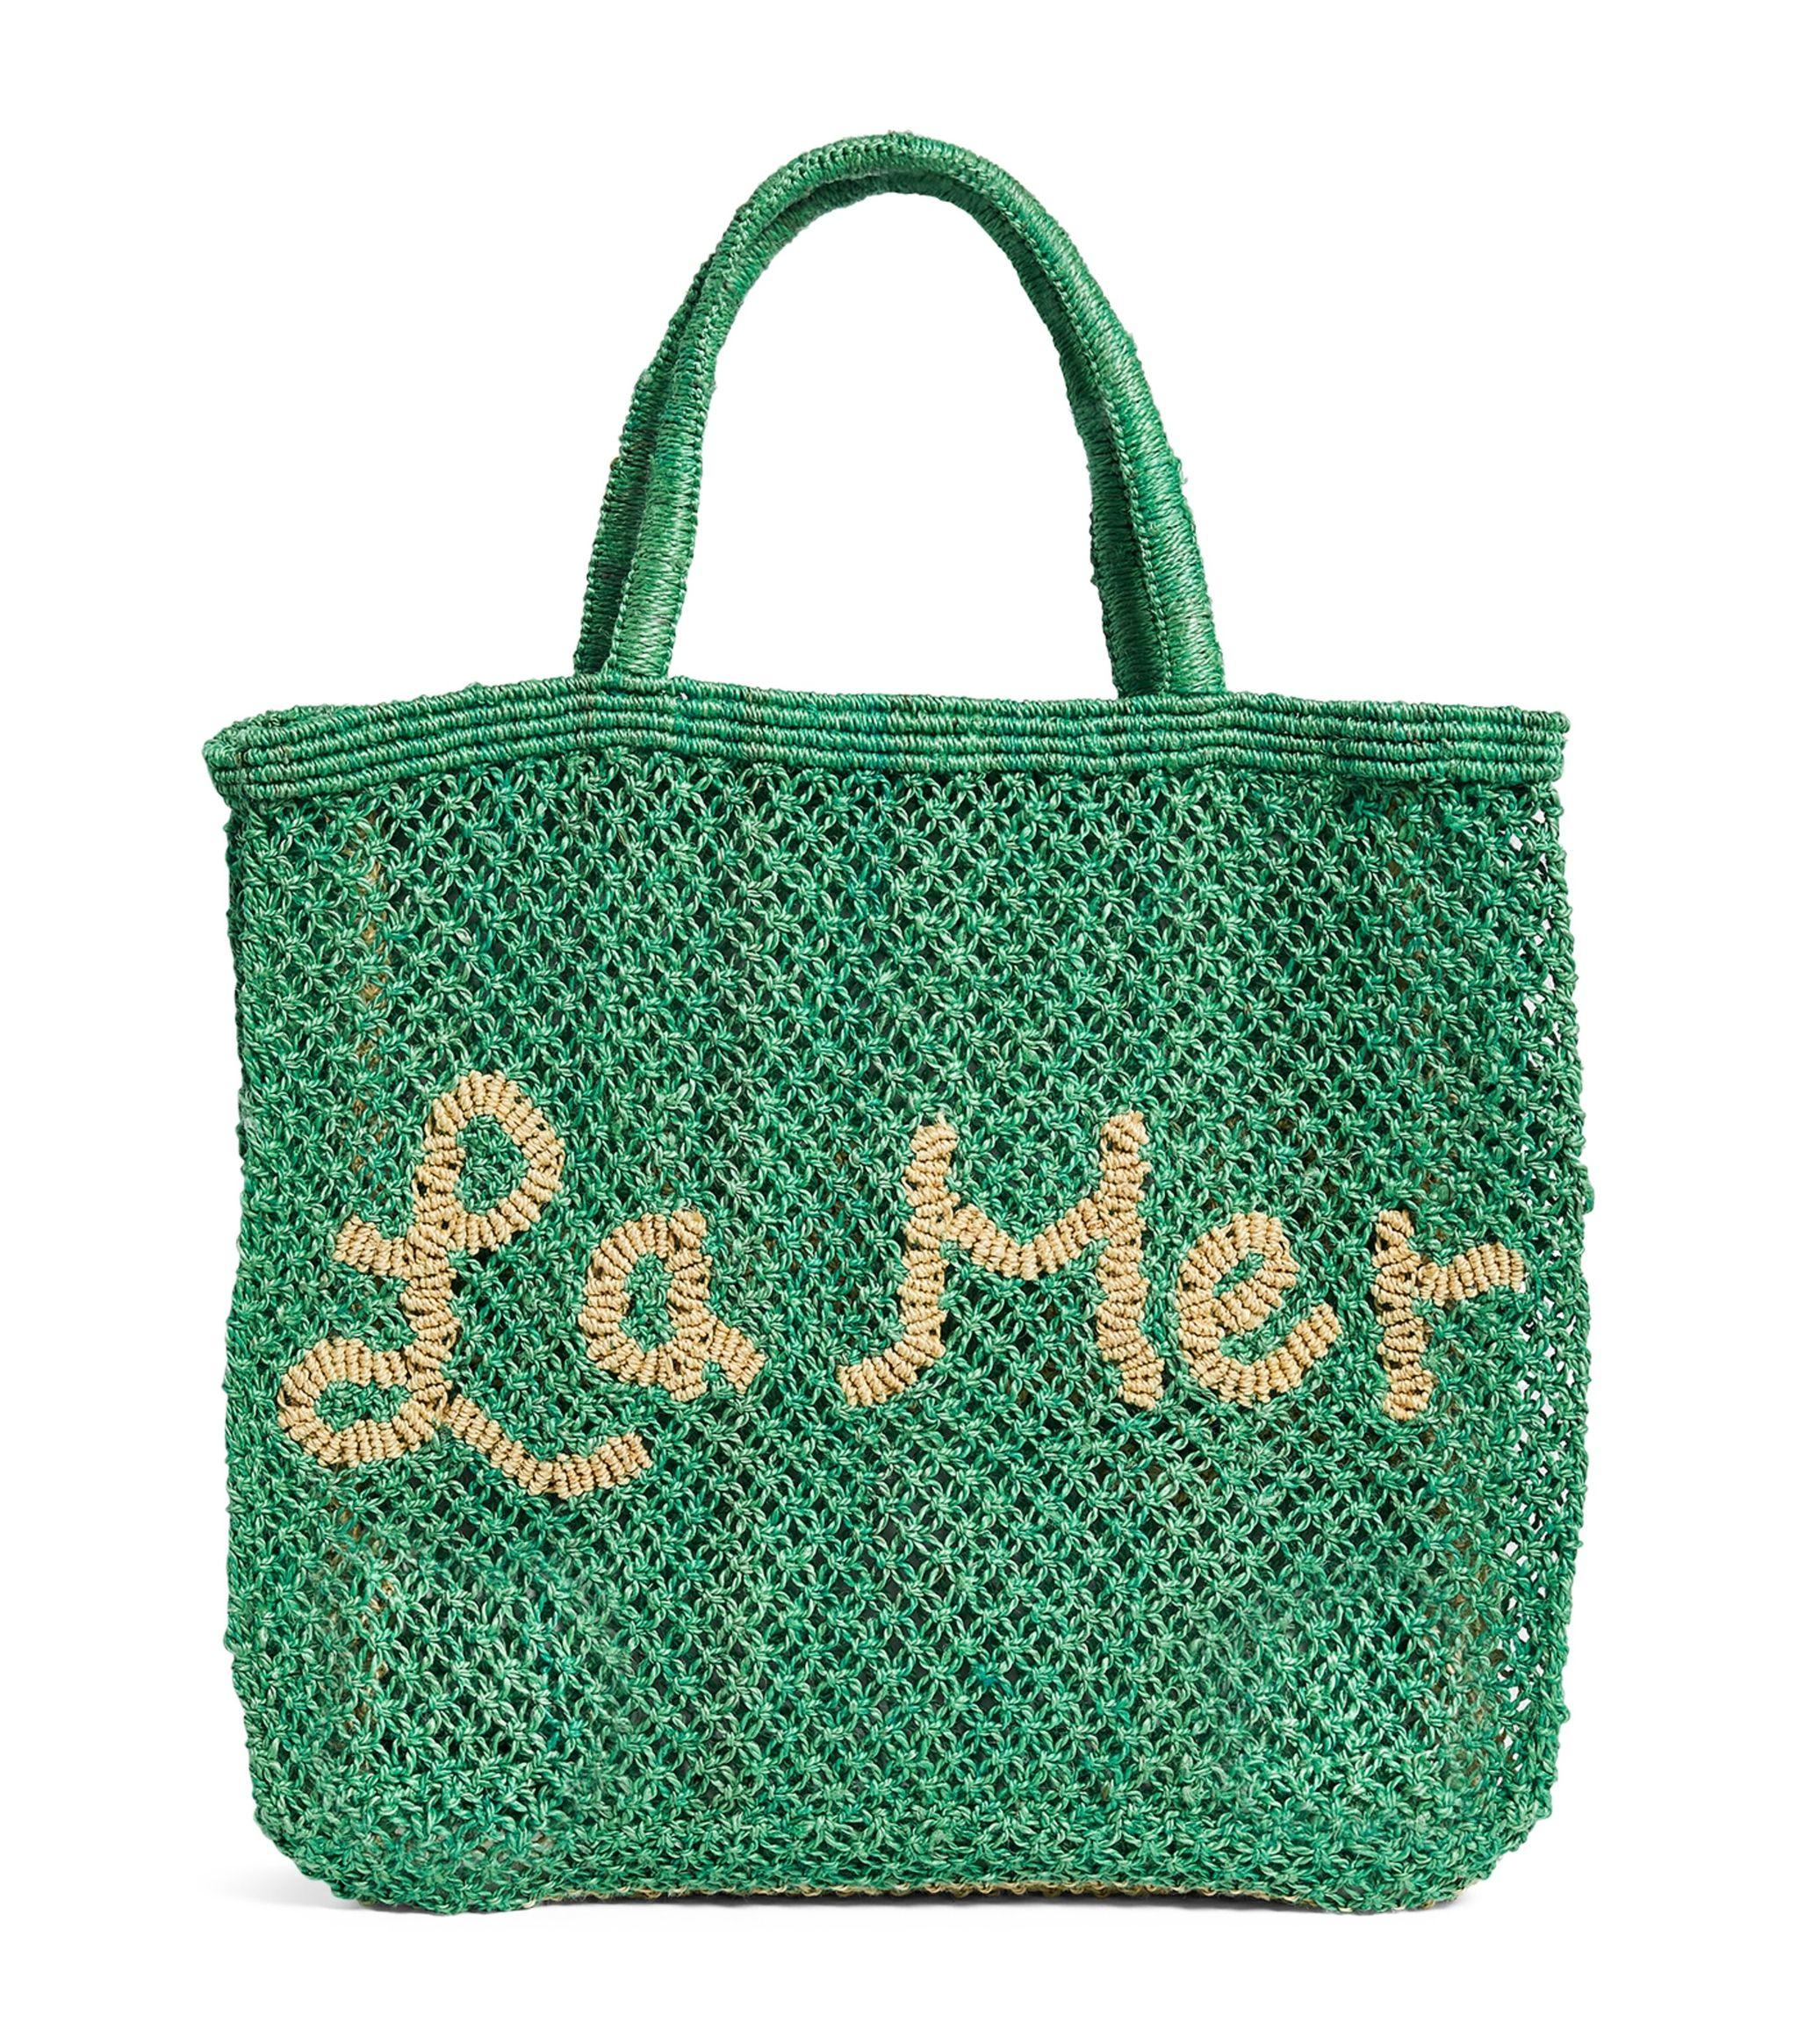 The Jacksons Large Woven La Mer Tote Bag in Green | Lyst